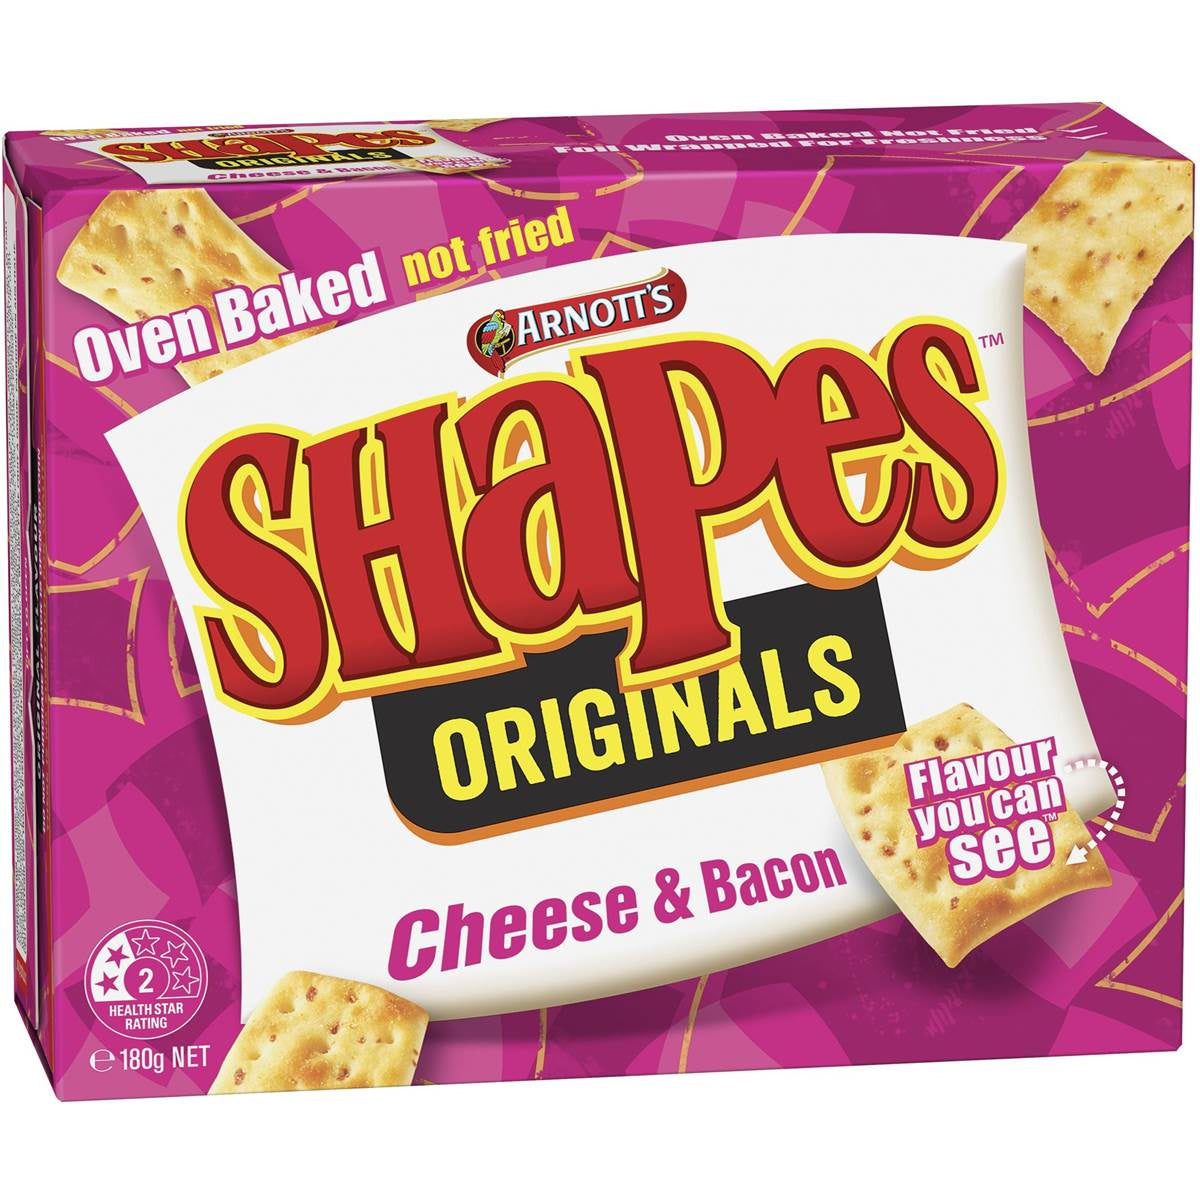 Arnotts Shapes Biscuits Cheese & Bacon 180g *